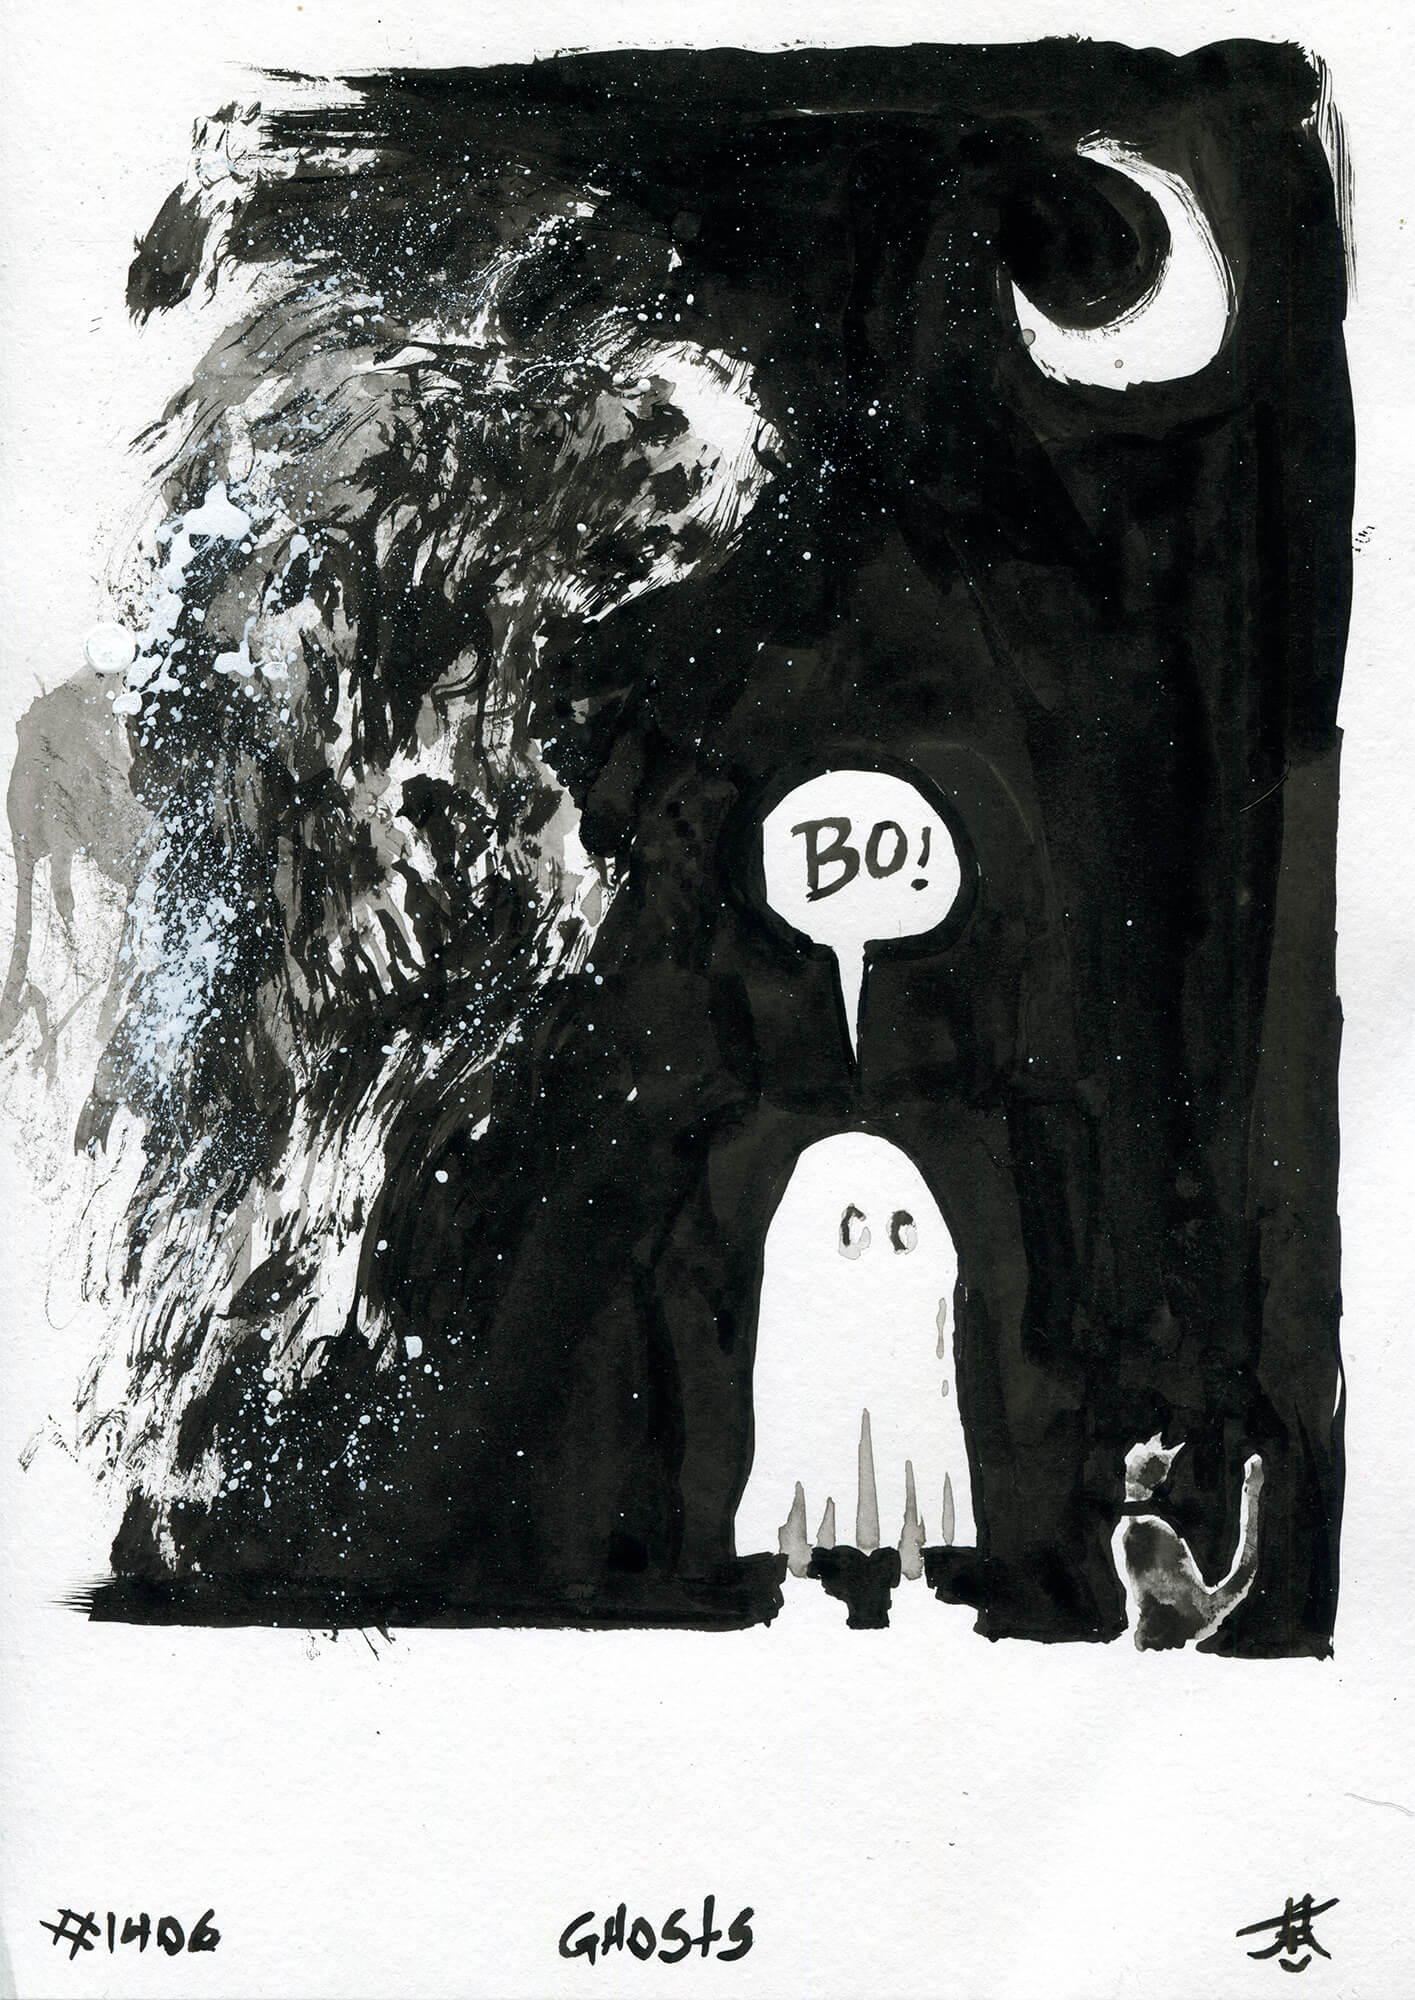 #1406 - Ghosts